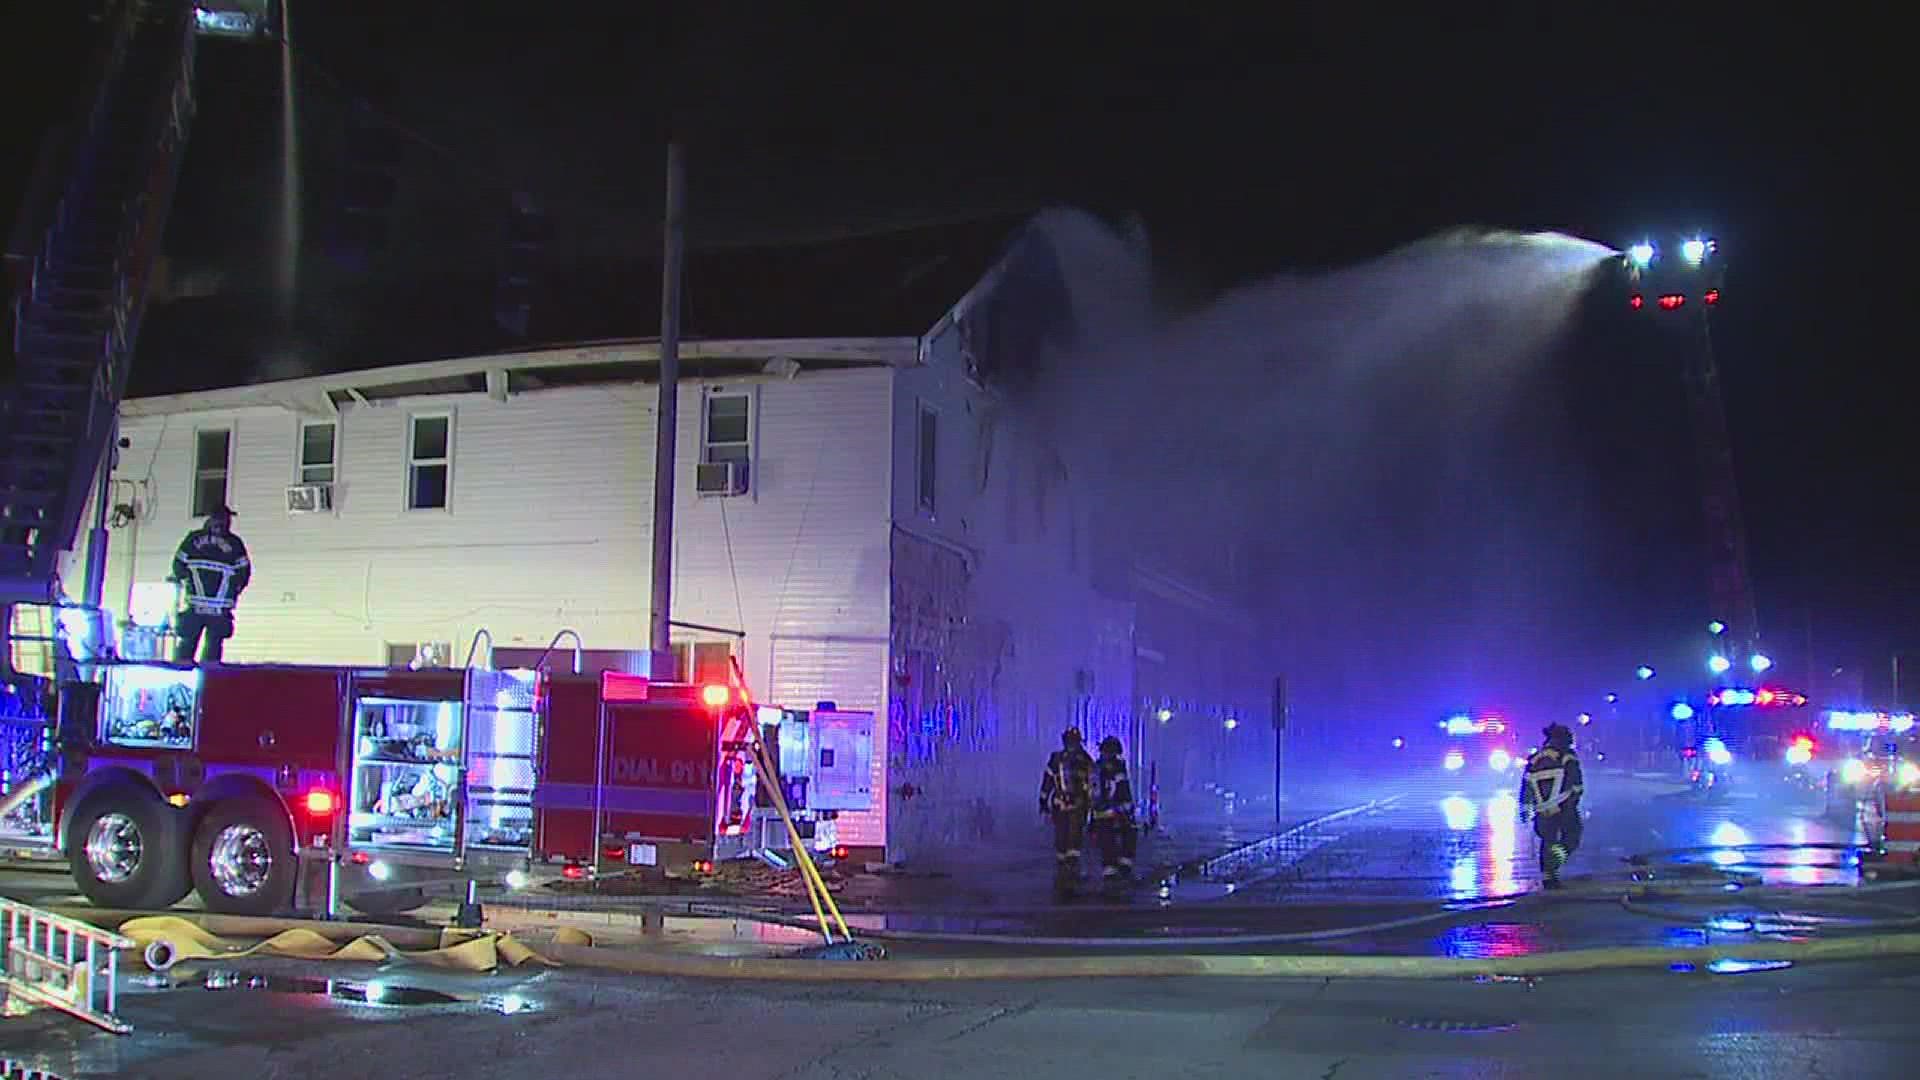 Investigators have determined the cause of Saturday night's fire, saying a commercial stove was too close to a wall.